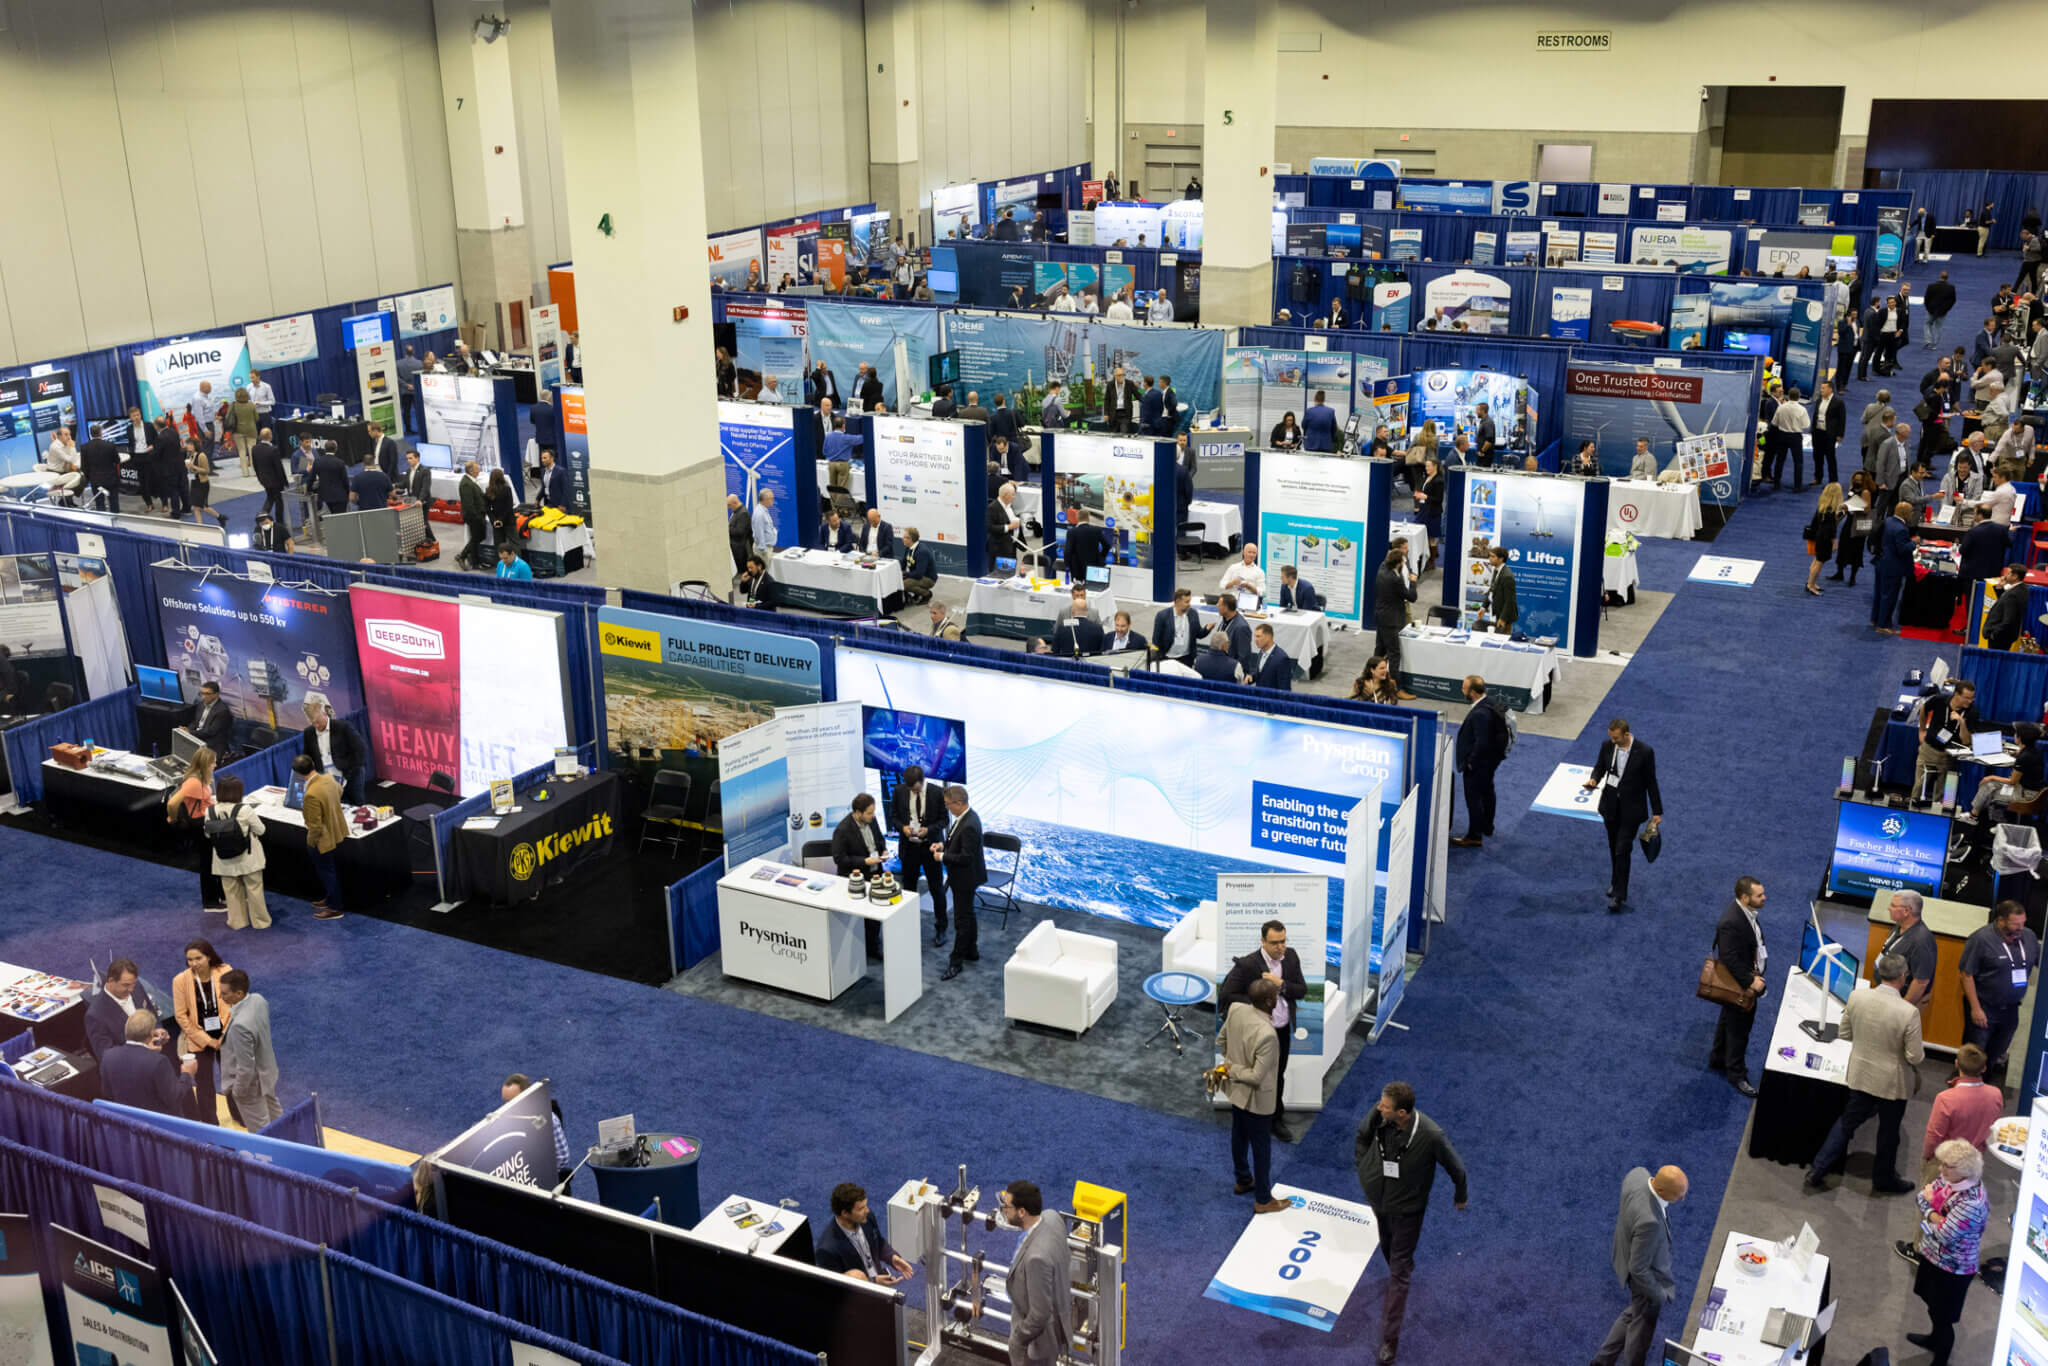 ACP's exhibit hall at a conference.